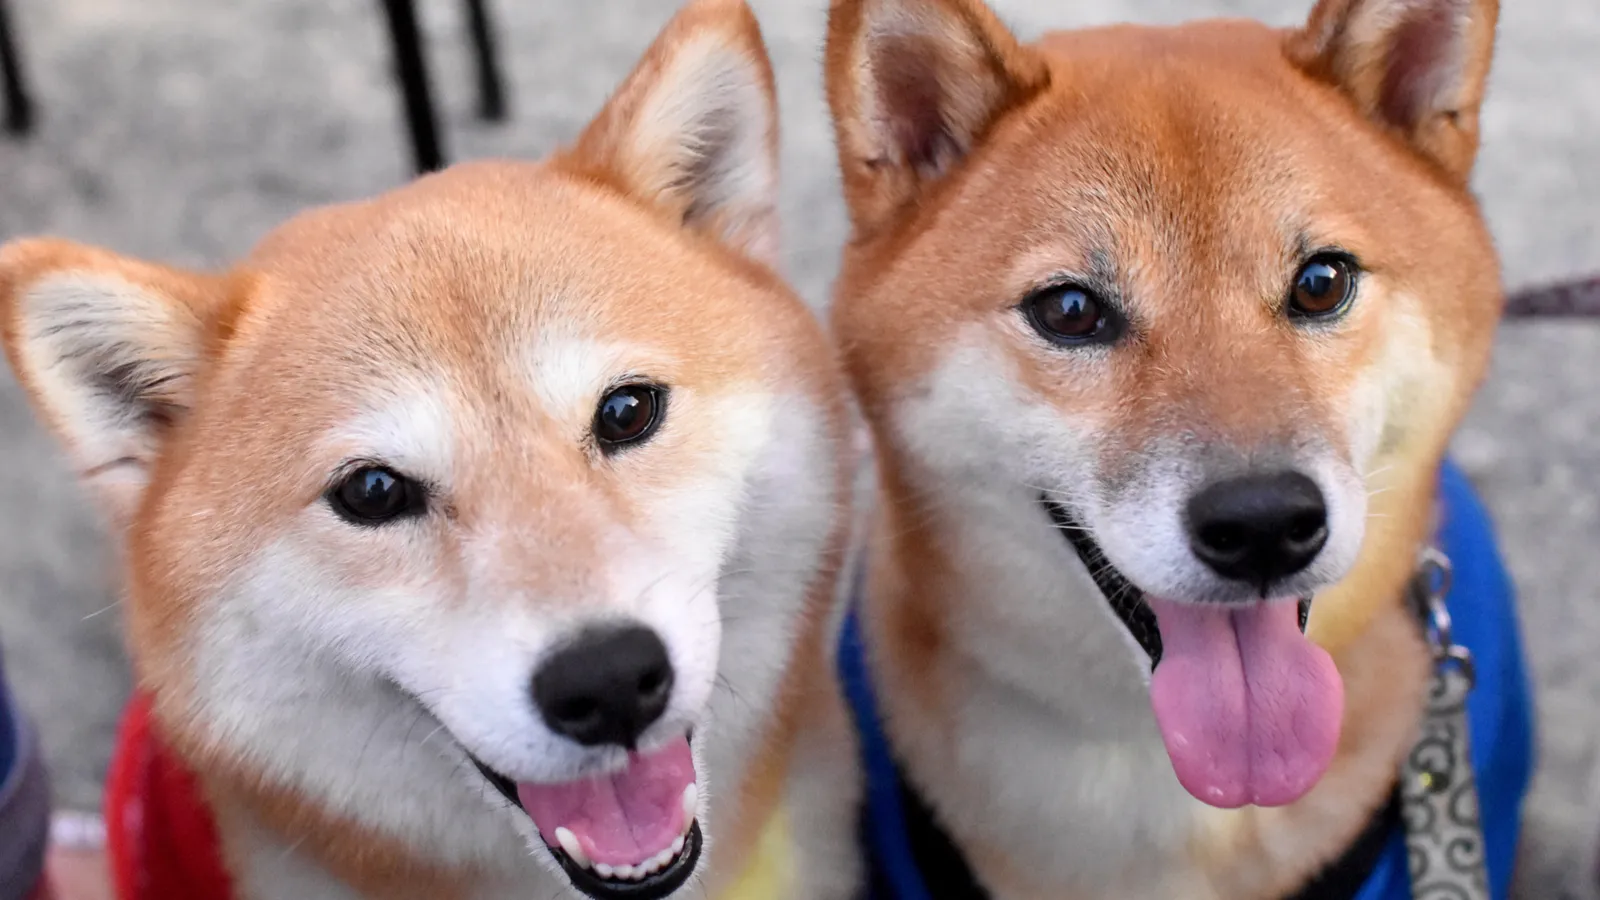 Shiba Inu and Dogecoin are popular cryptocurrencies named after dogs. Image: Shutterstock.